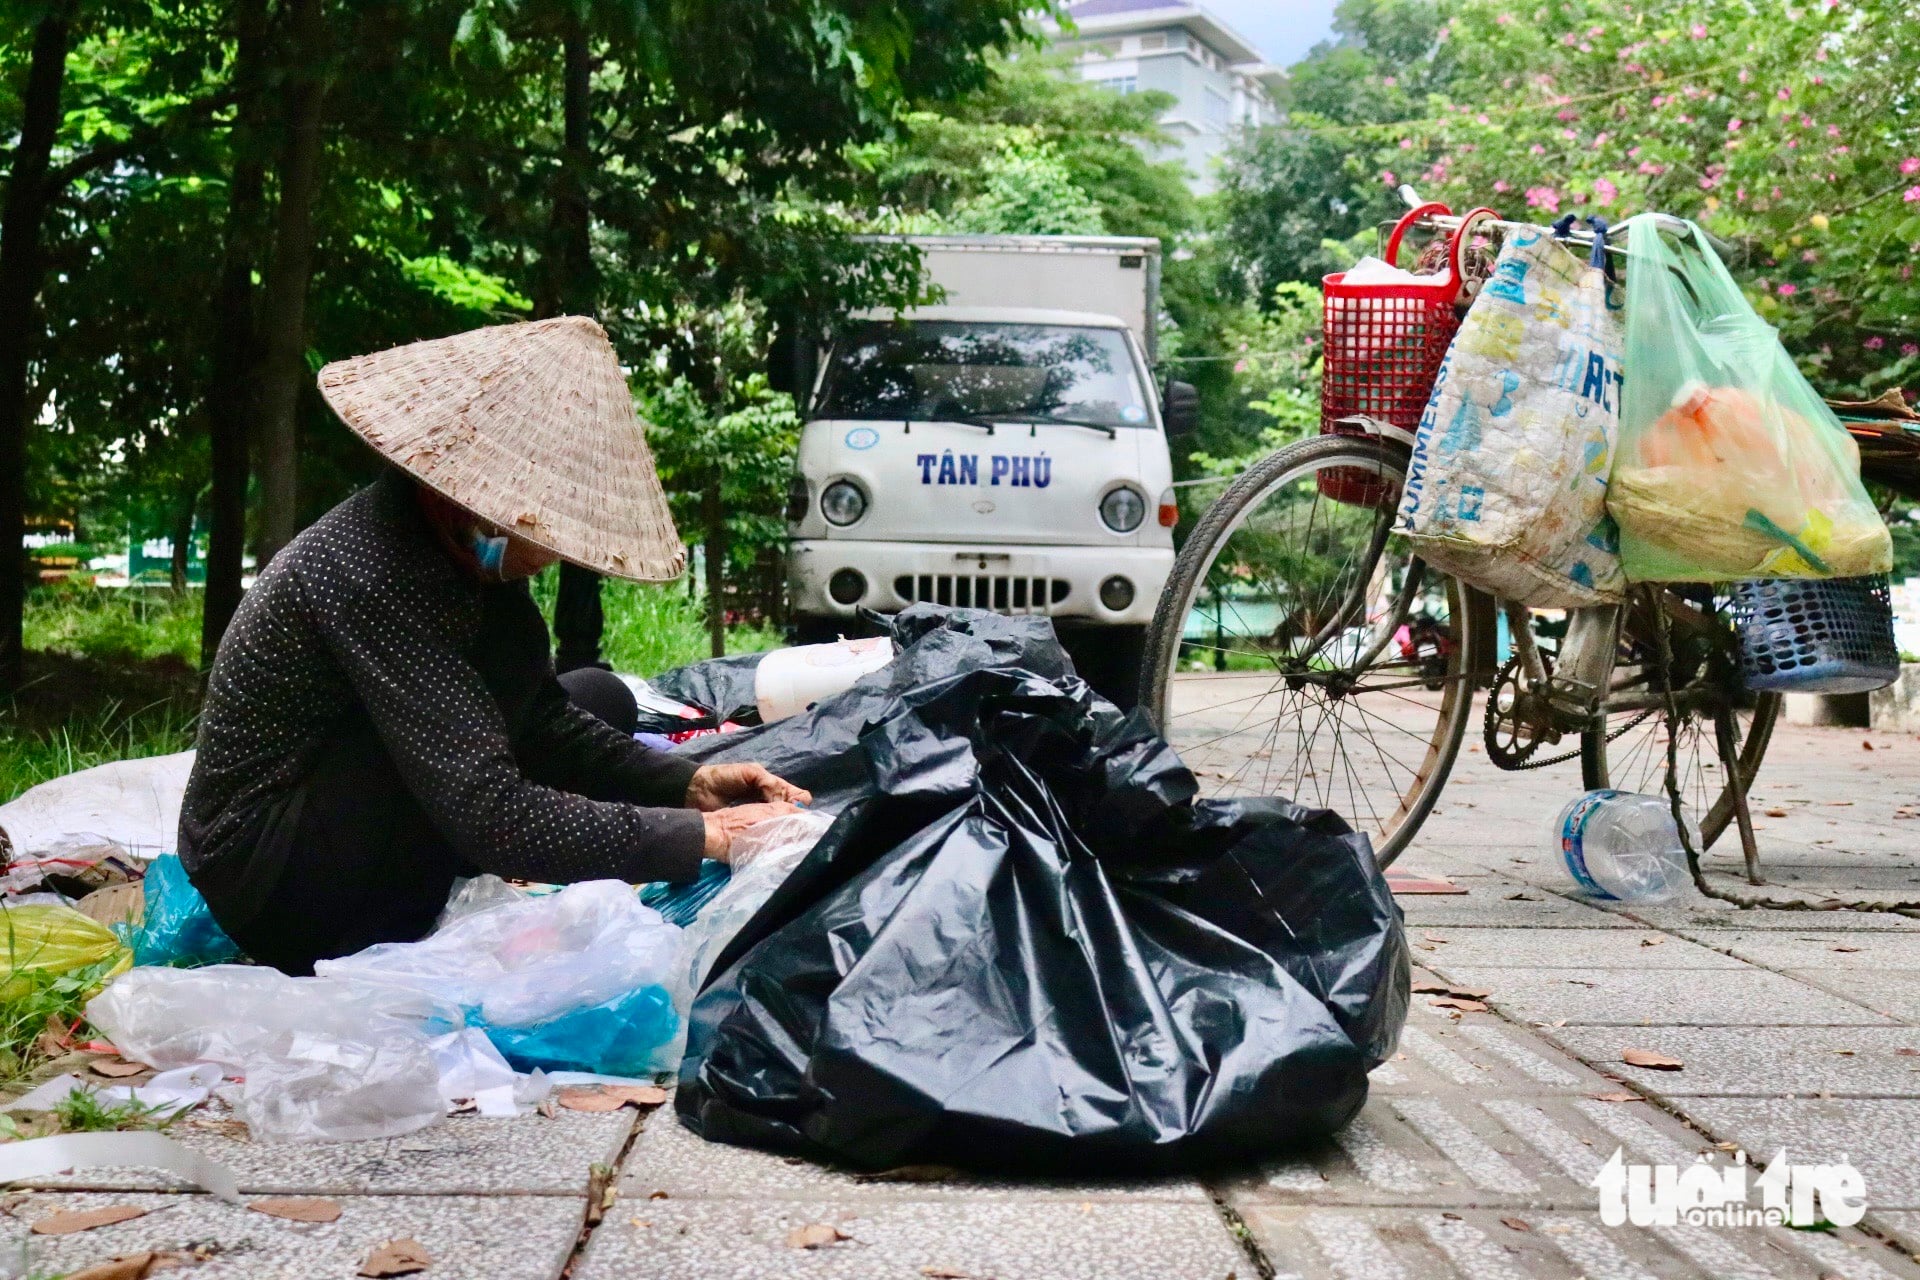 Stakeholders discuss raising awareness, promoting role of waste pickers in Vietnam